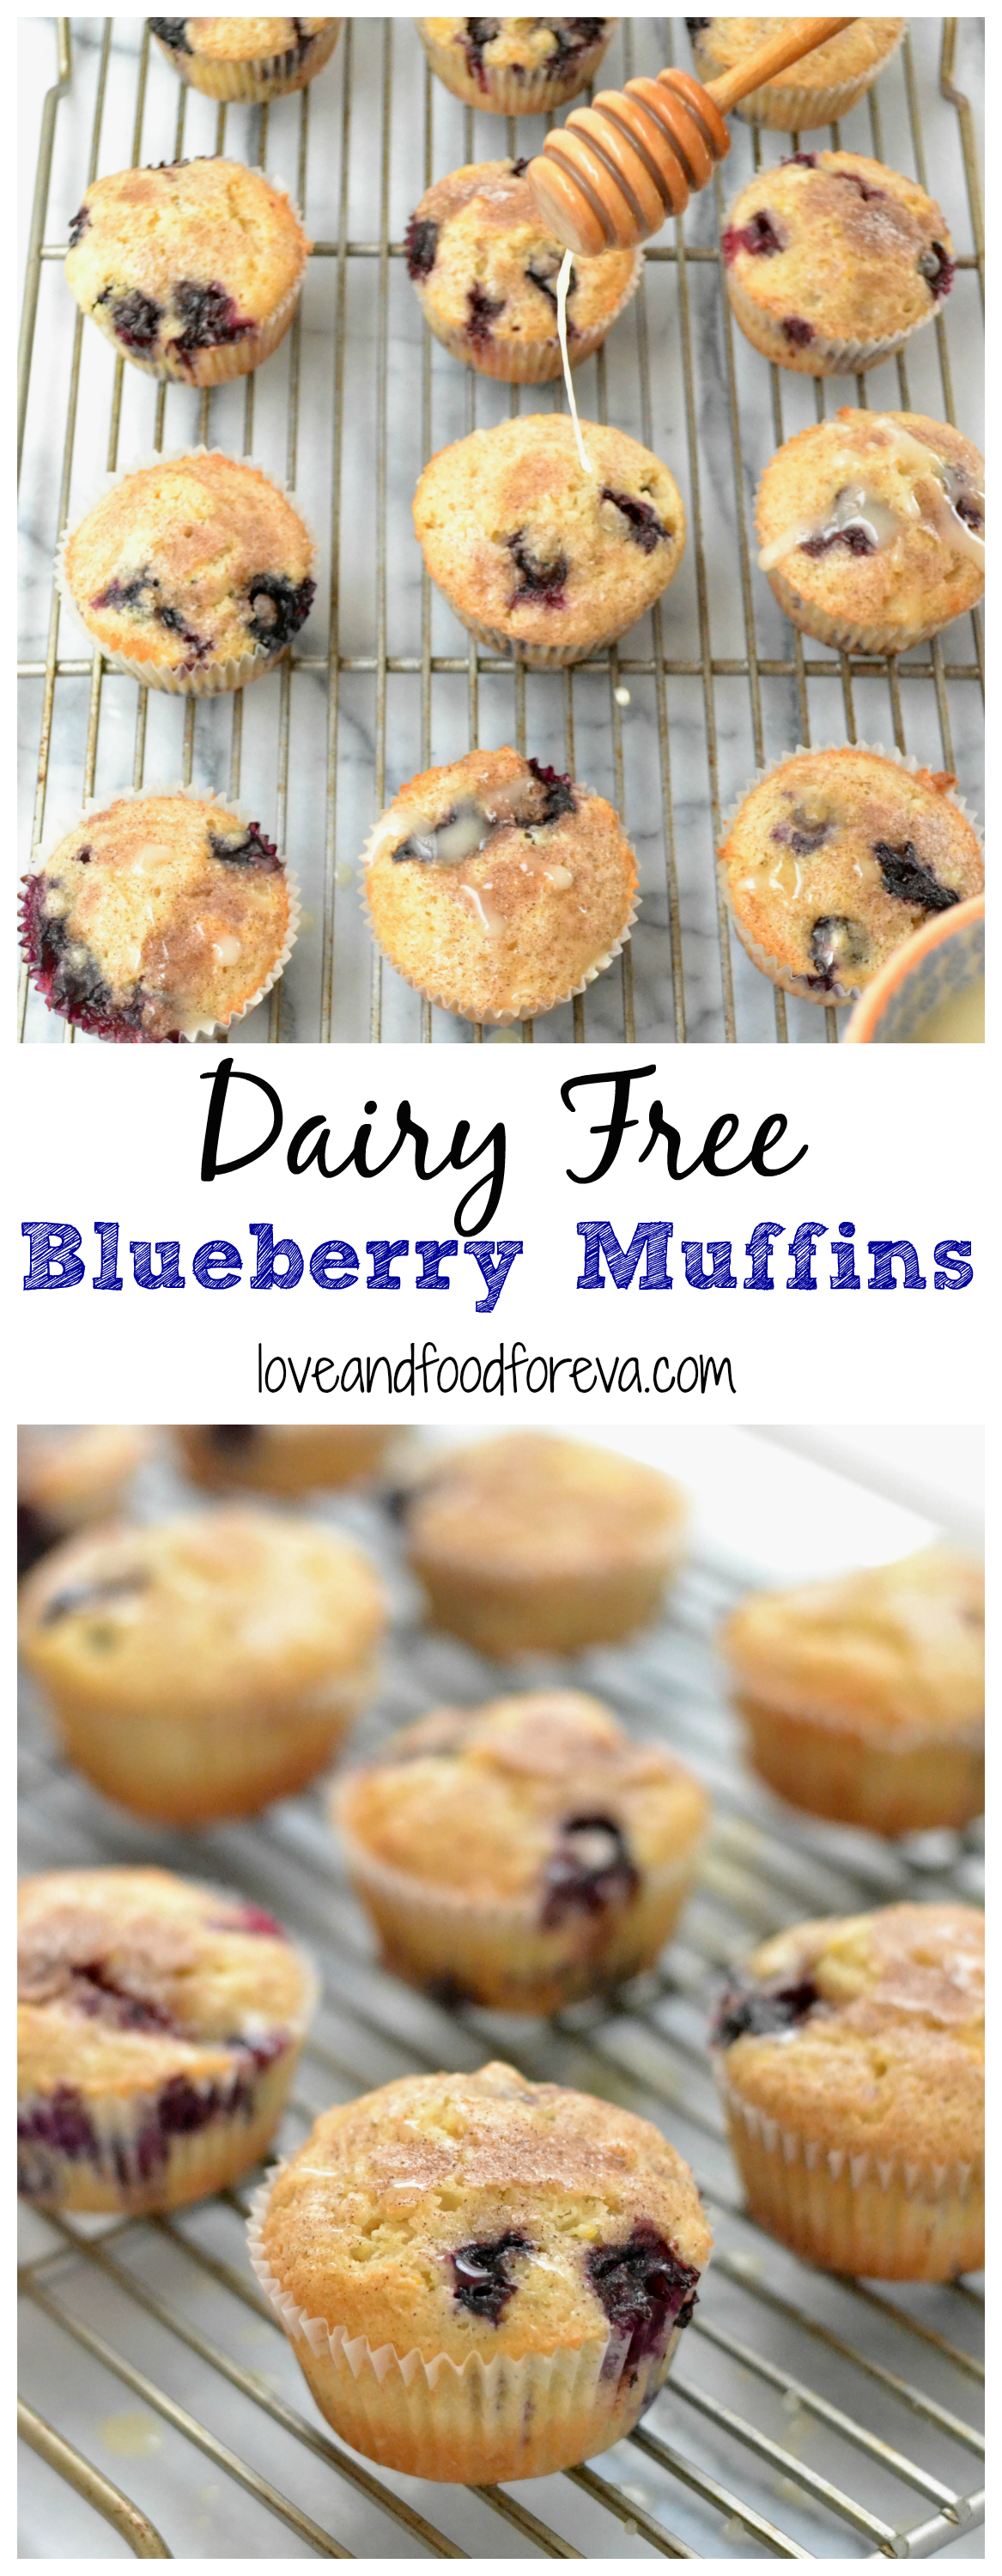 Dairy Free Blueberry Muffins with Lemon Glaze - perfect for a light brunch!